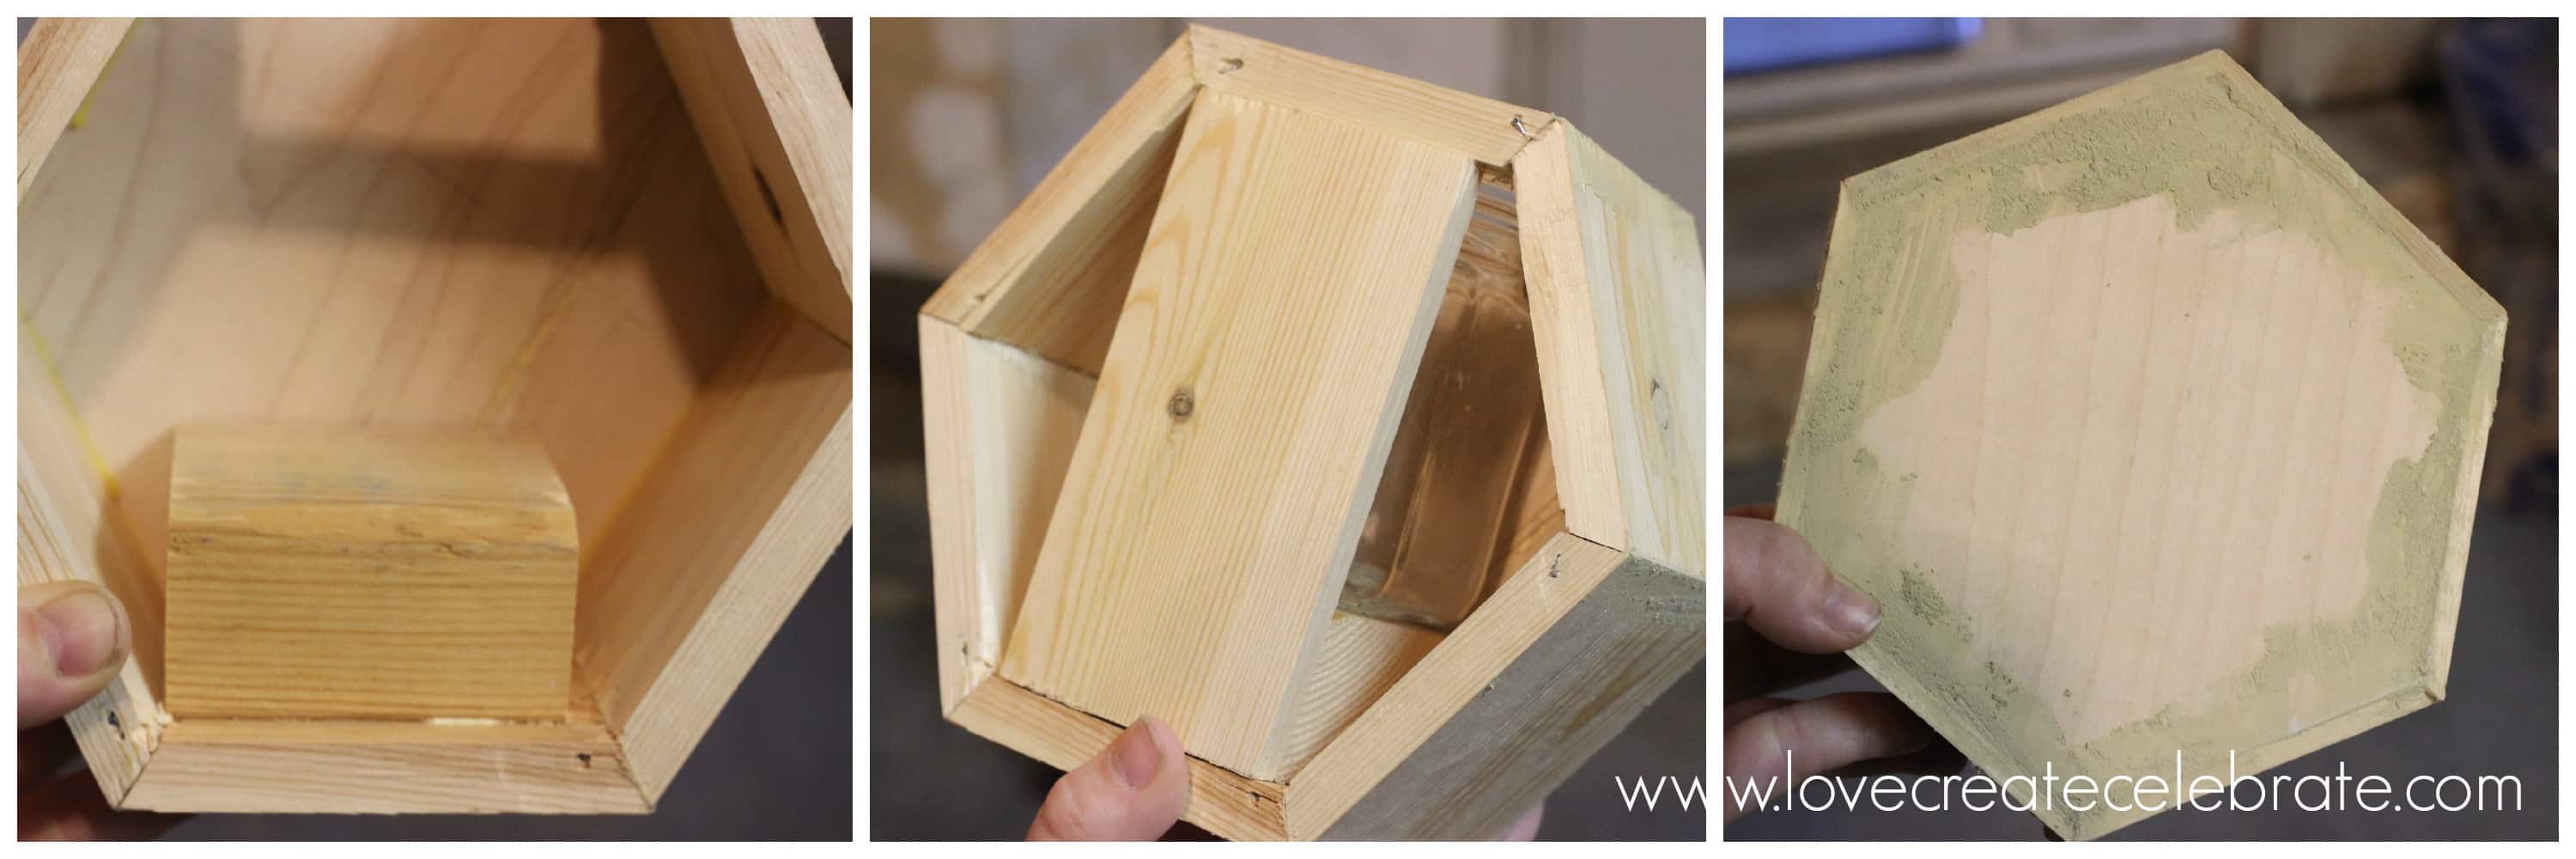 Cut a wooden piece for the jar to sit on inside, and cover the back opening length-wise